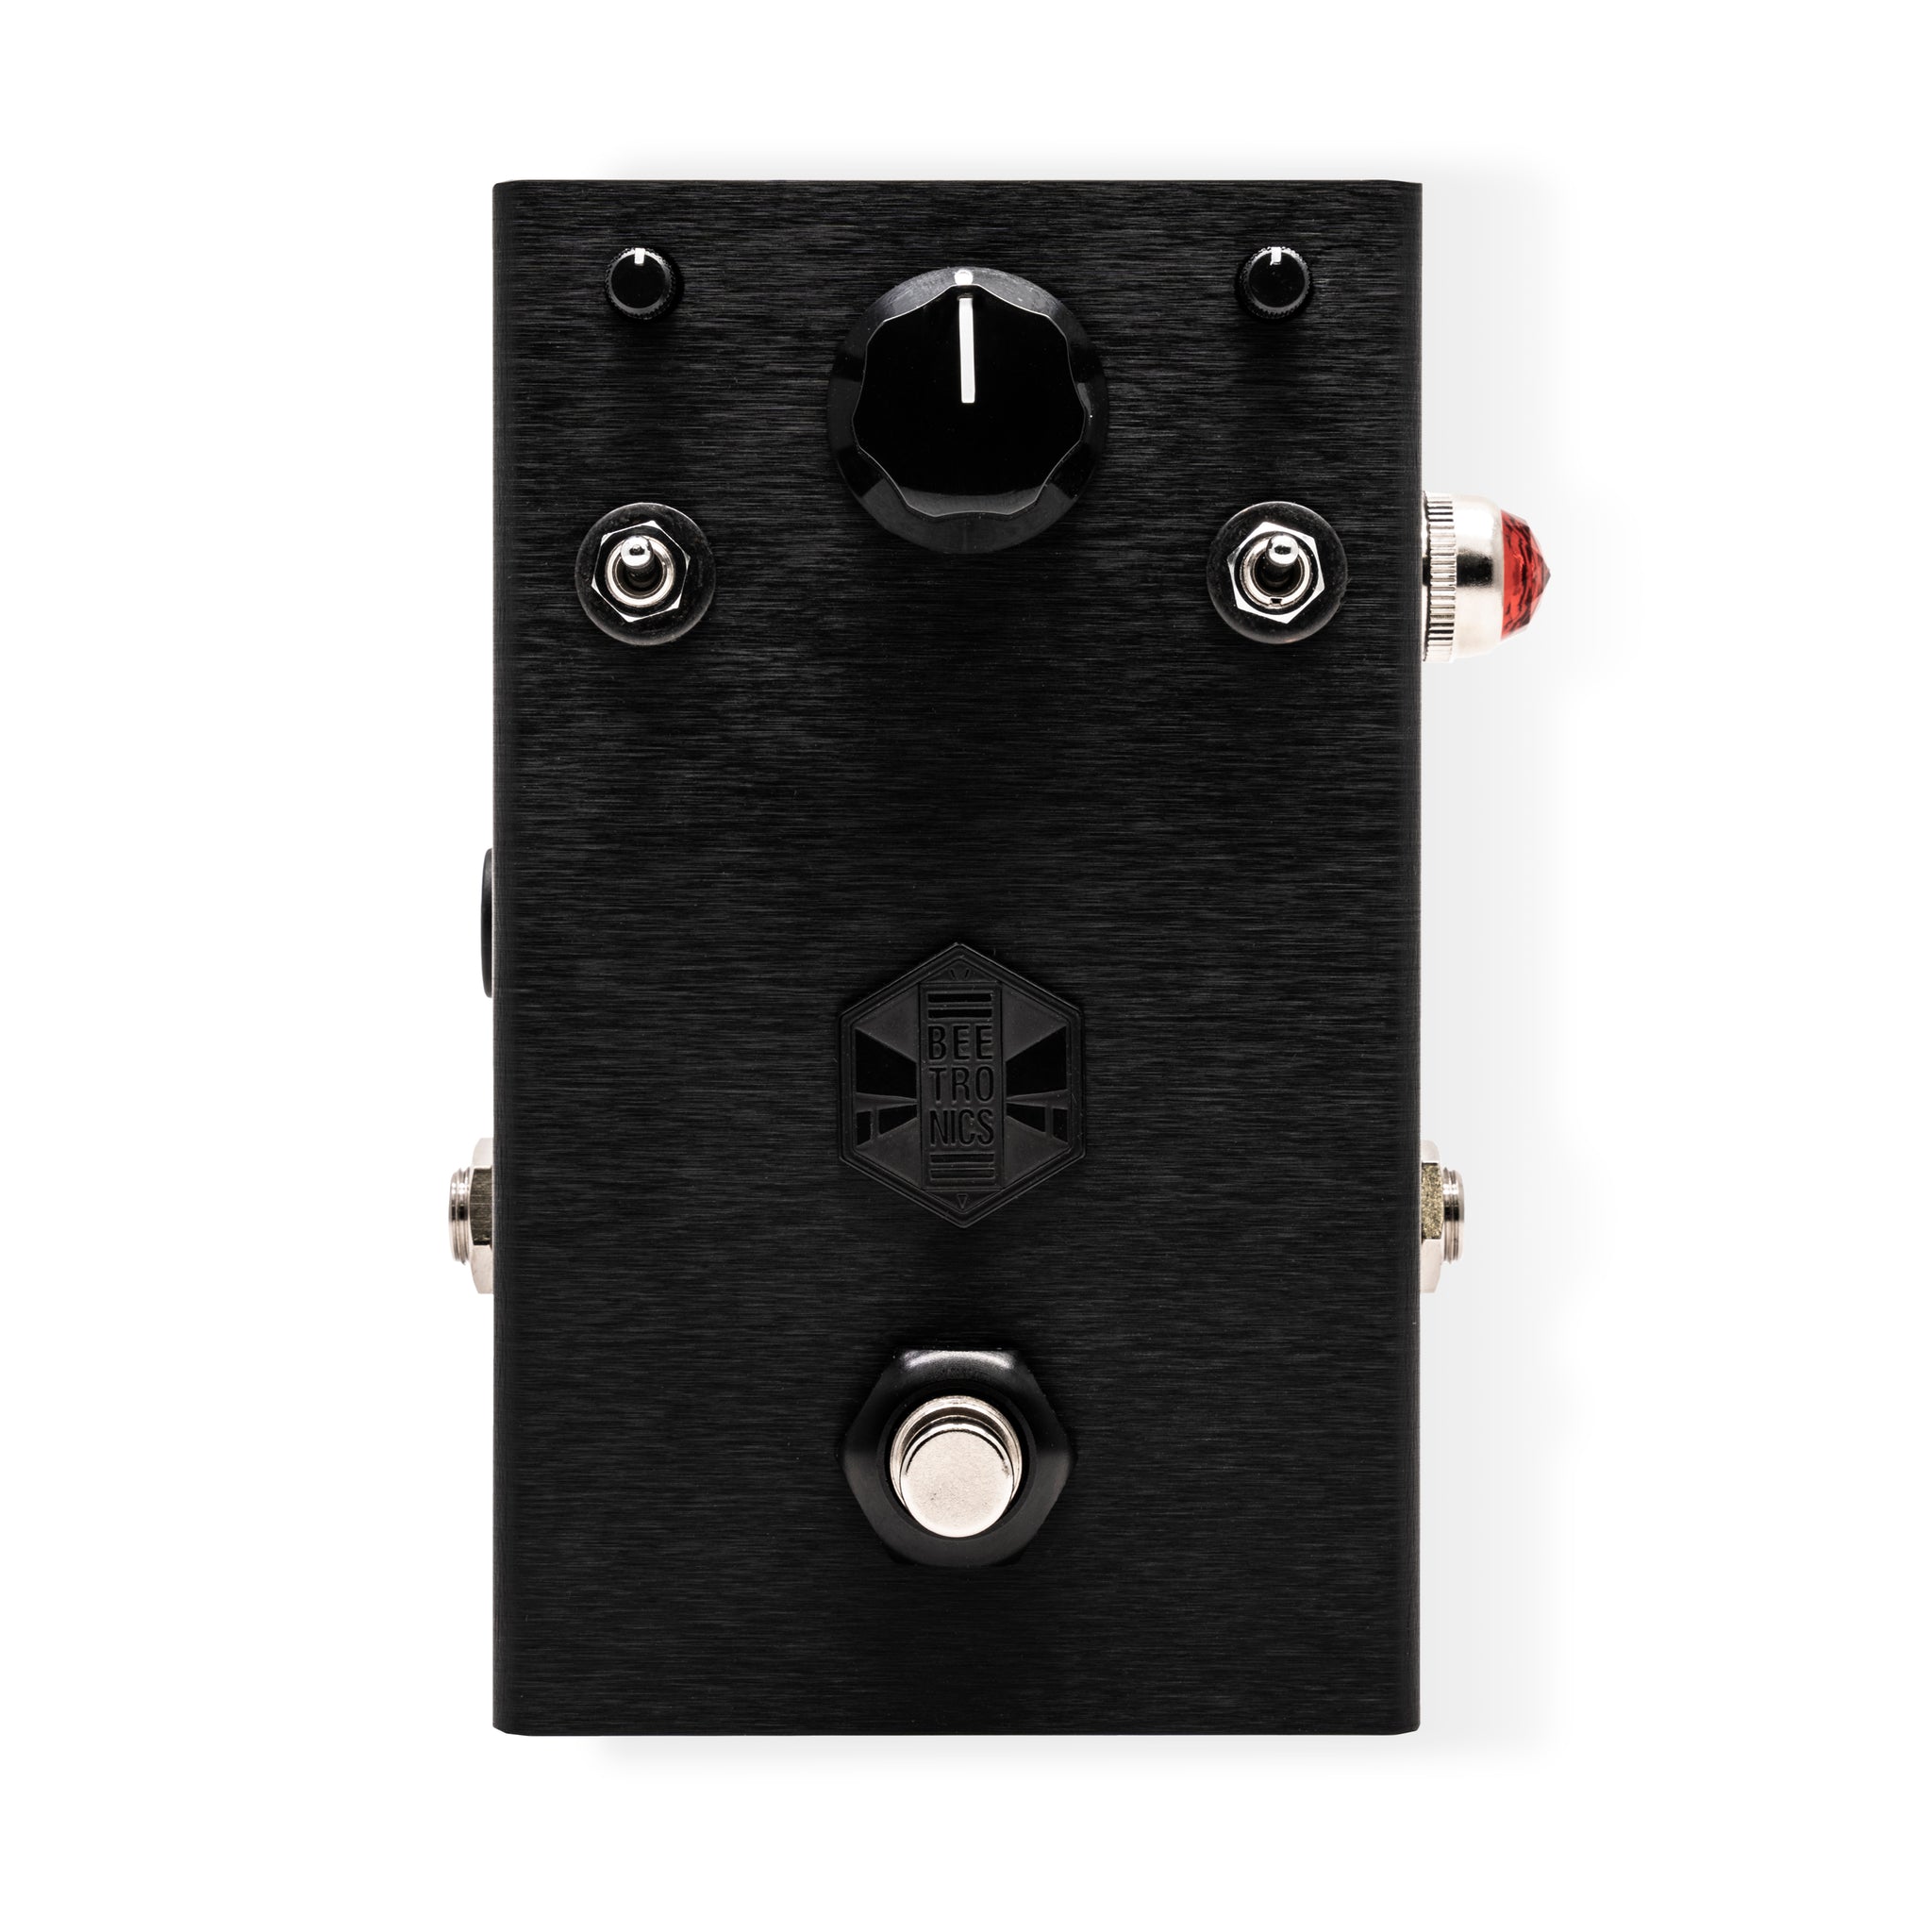 Overhive Mid-Gain Overdrive <p> The Blackbee Edition